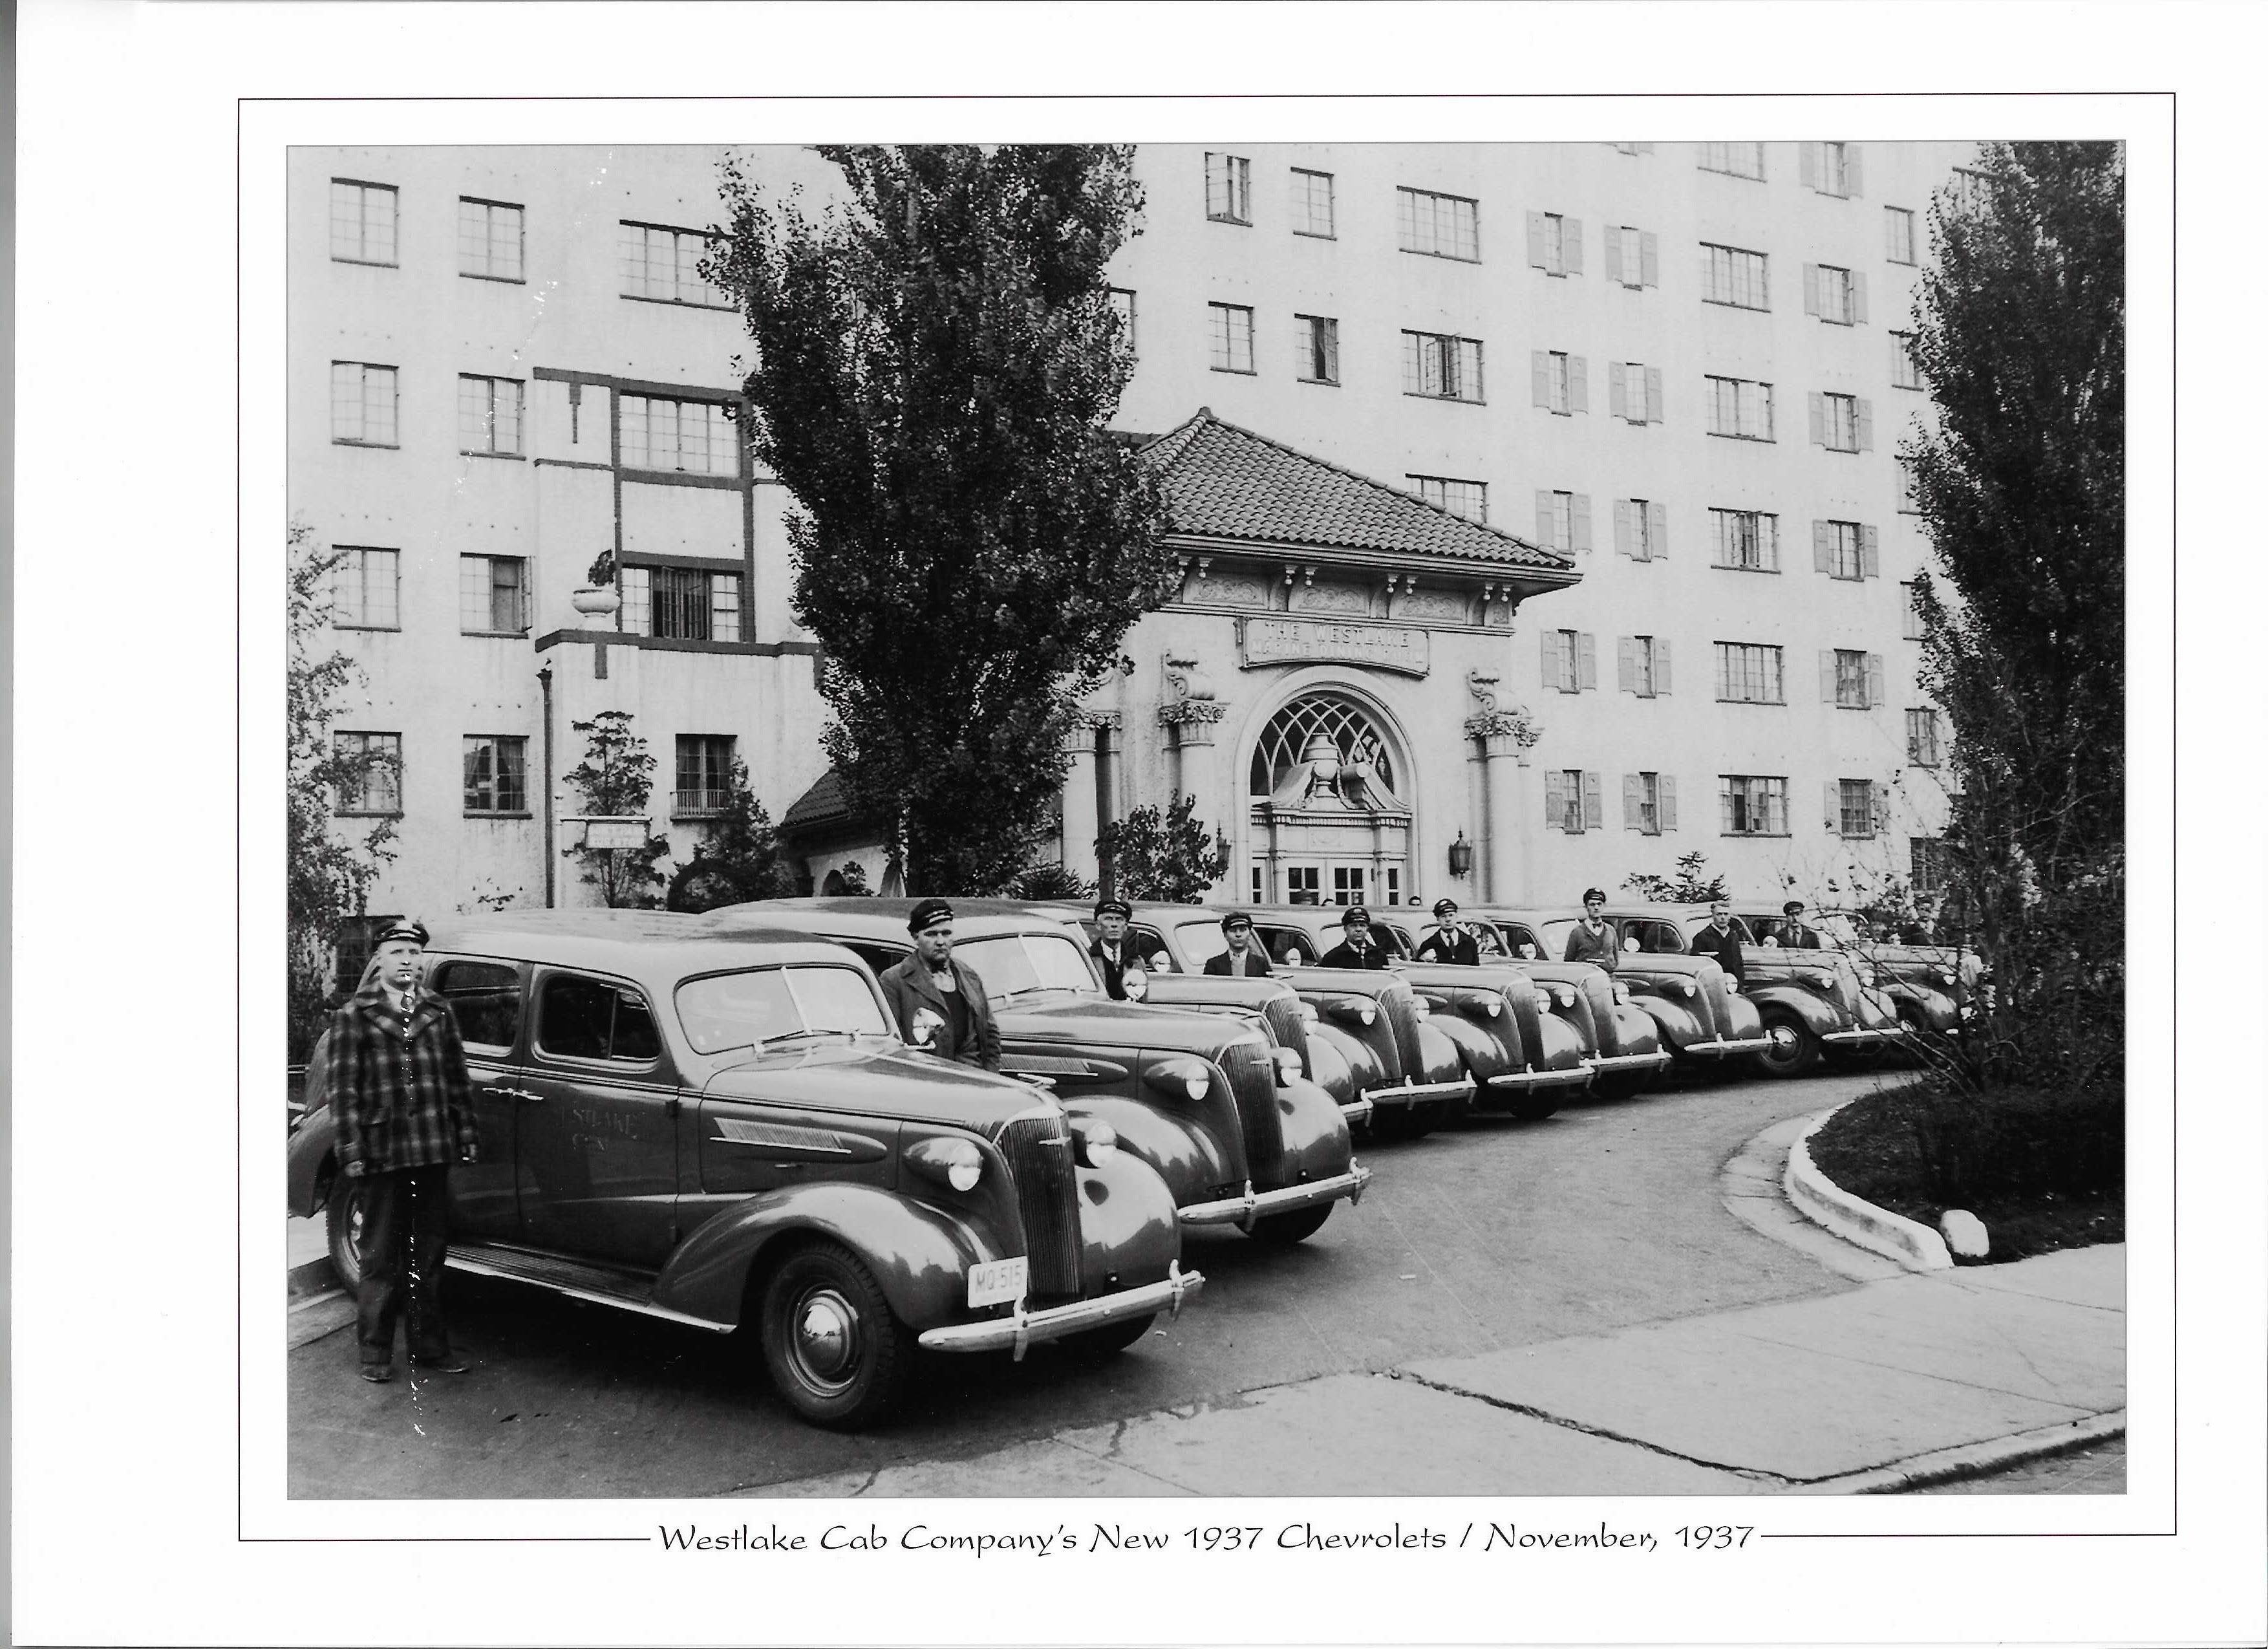 A new line of black Chevrolet cabs in front of the Westlake Hotel, November 1937.